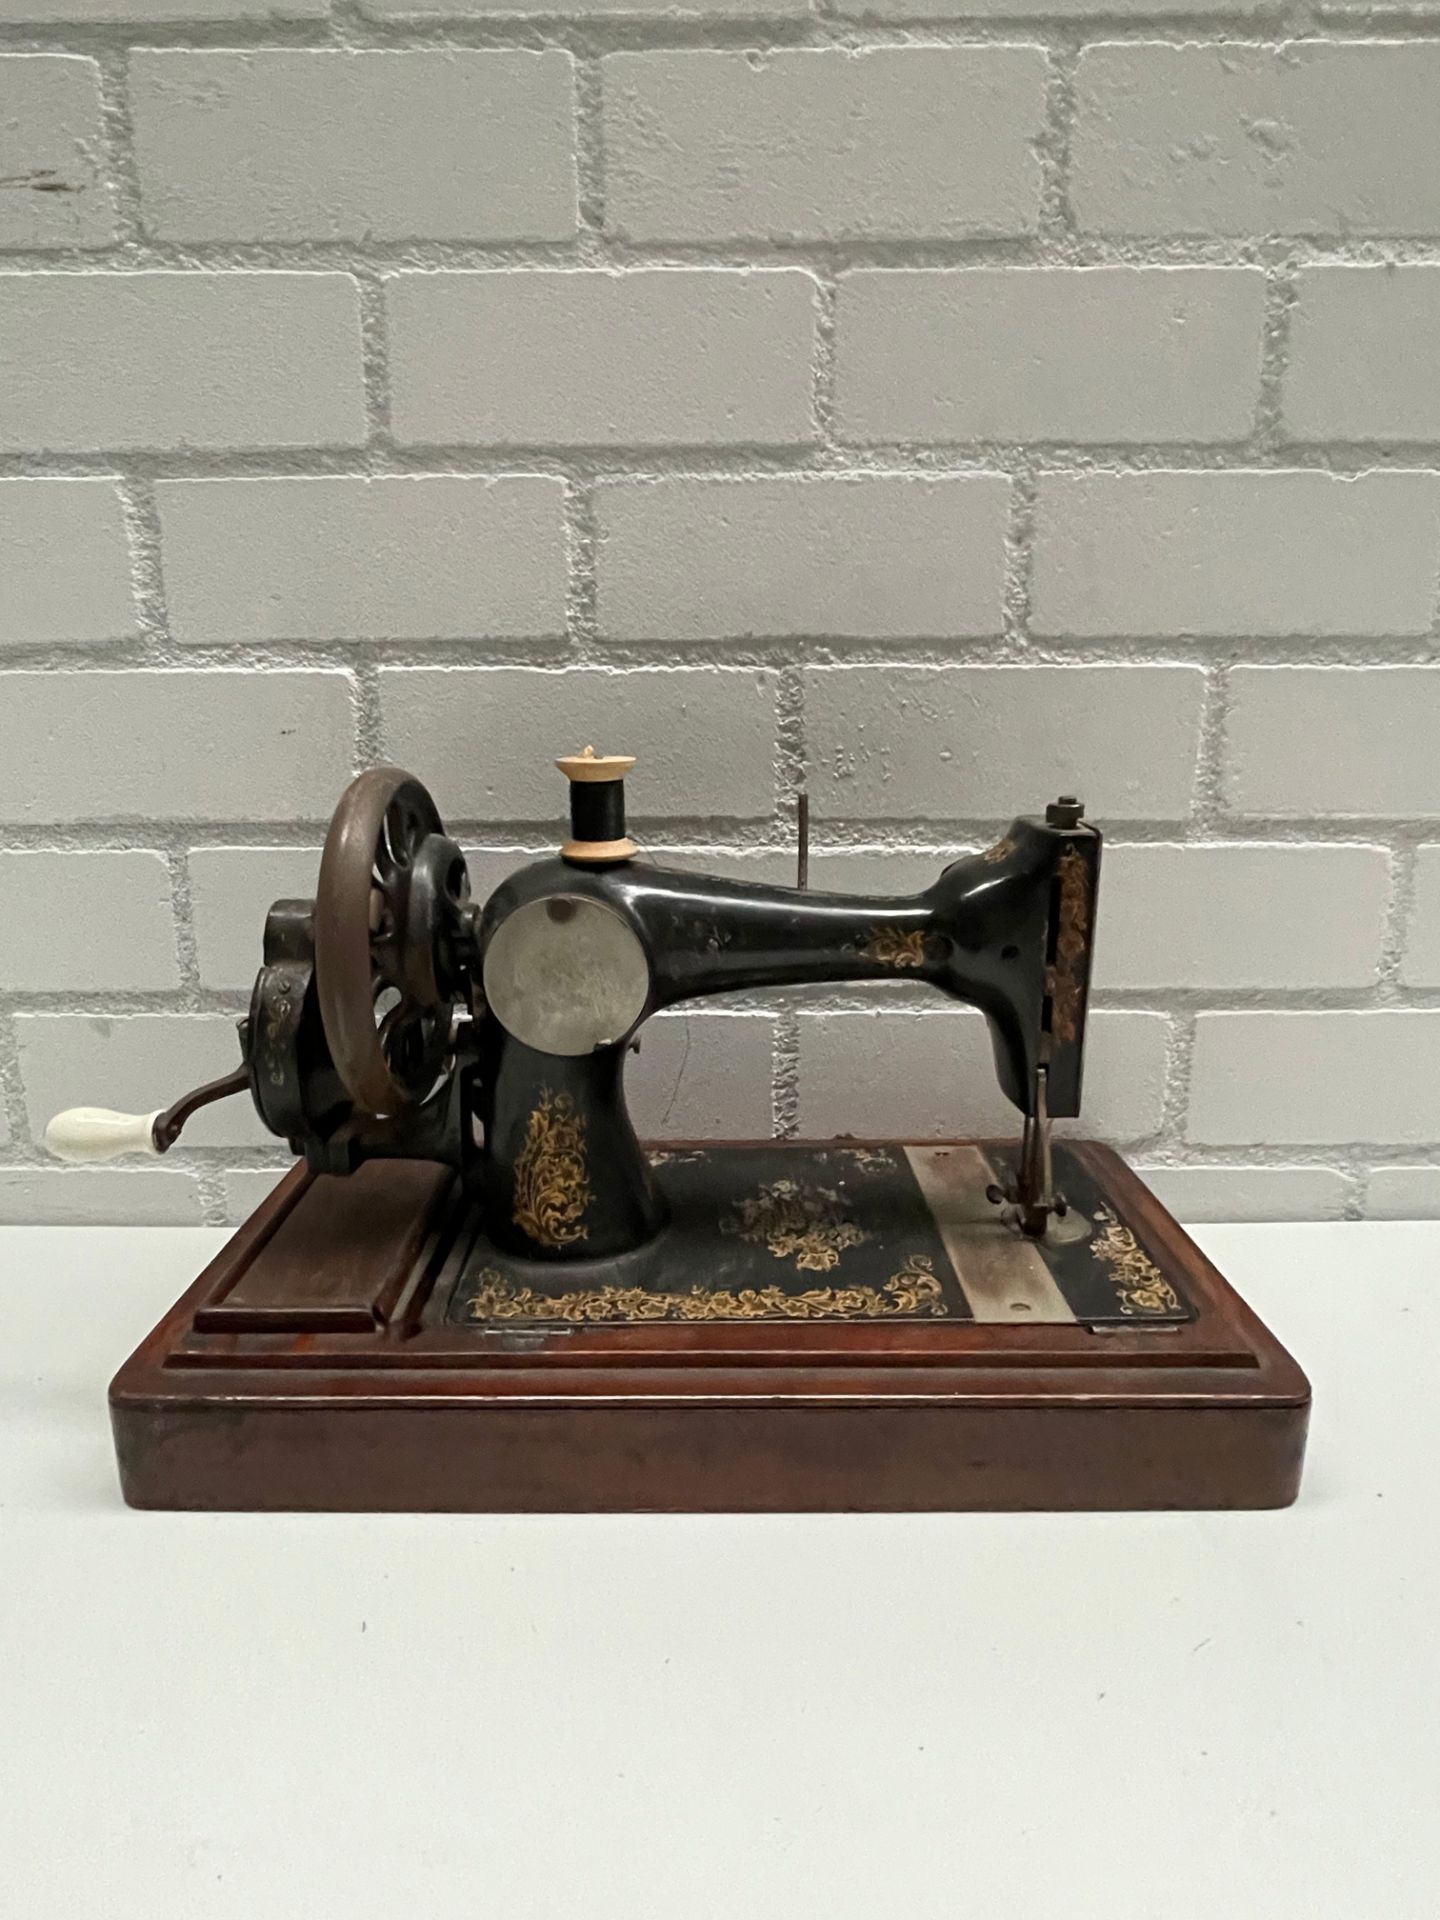 Vintage Cast Iron Sewing Machine - Image 5 of 11